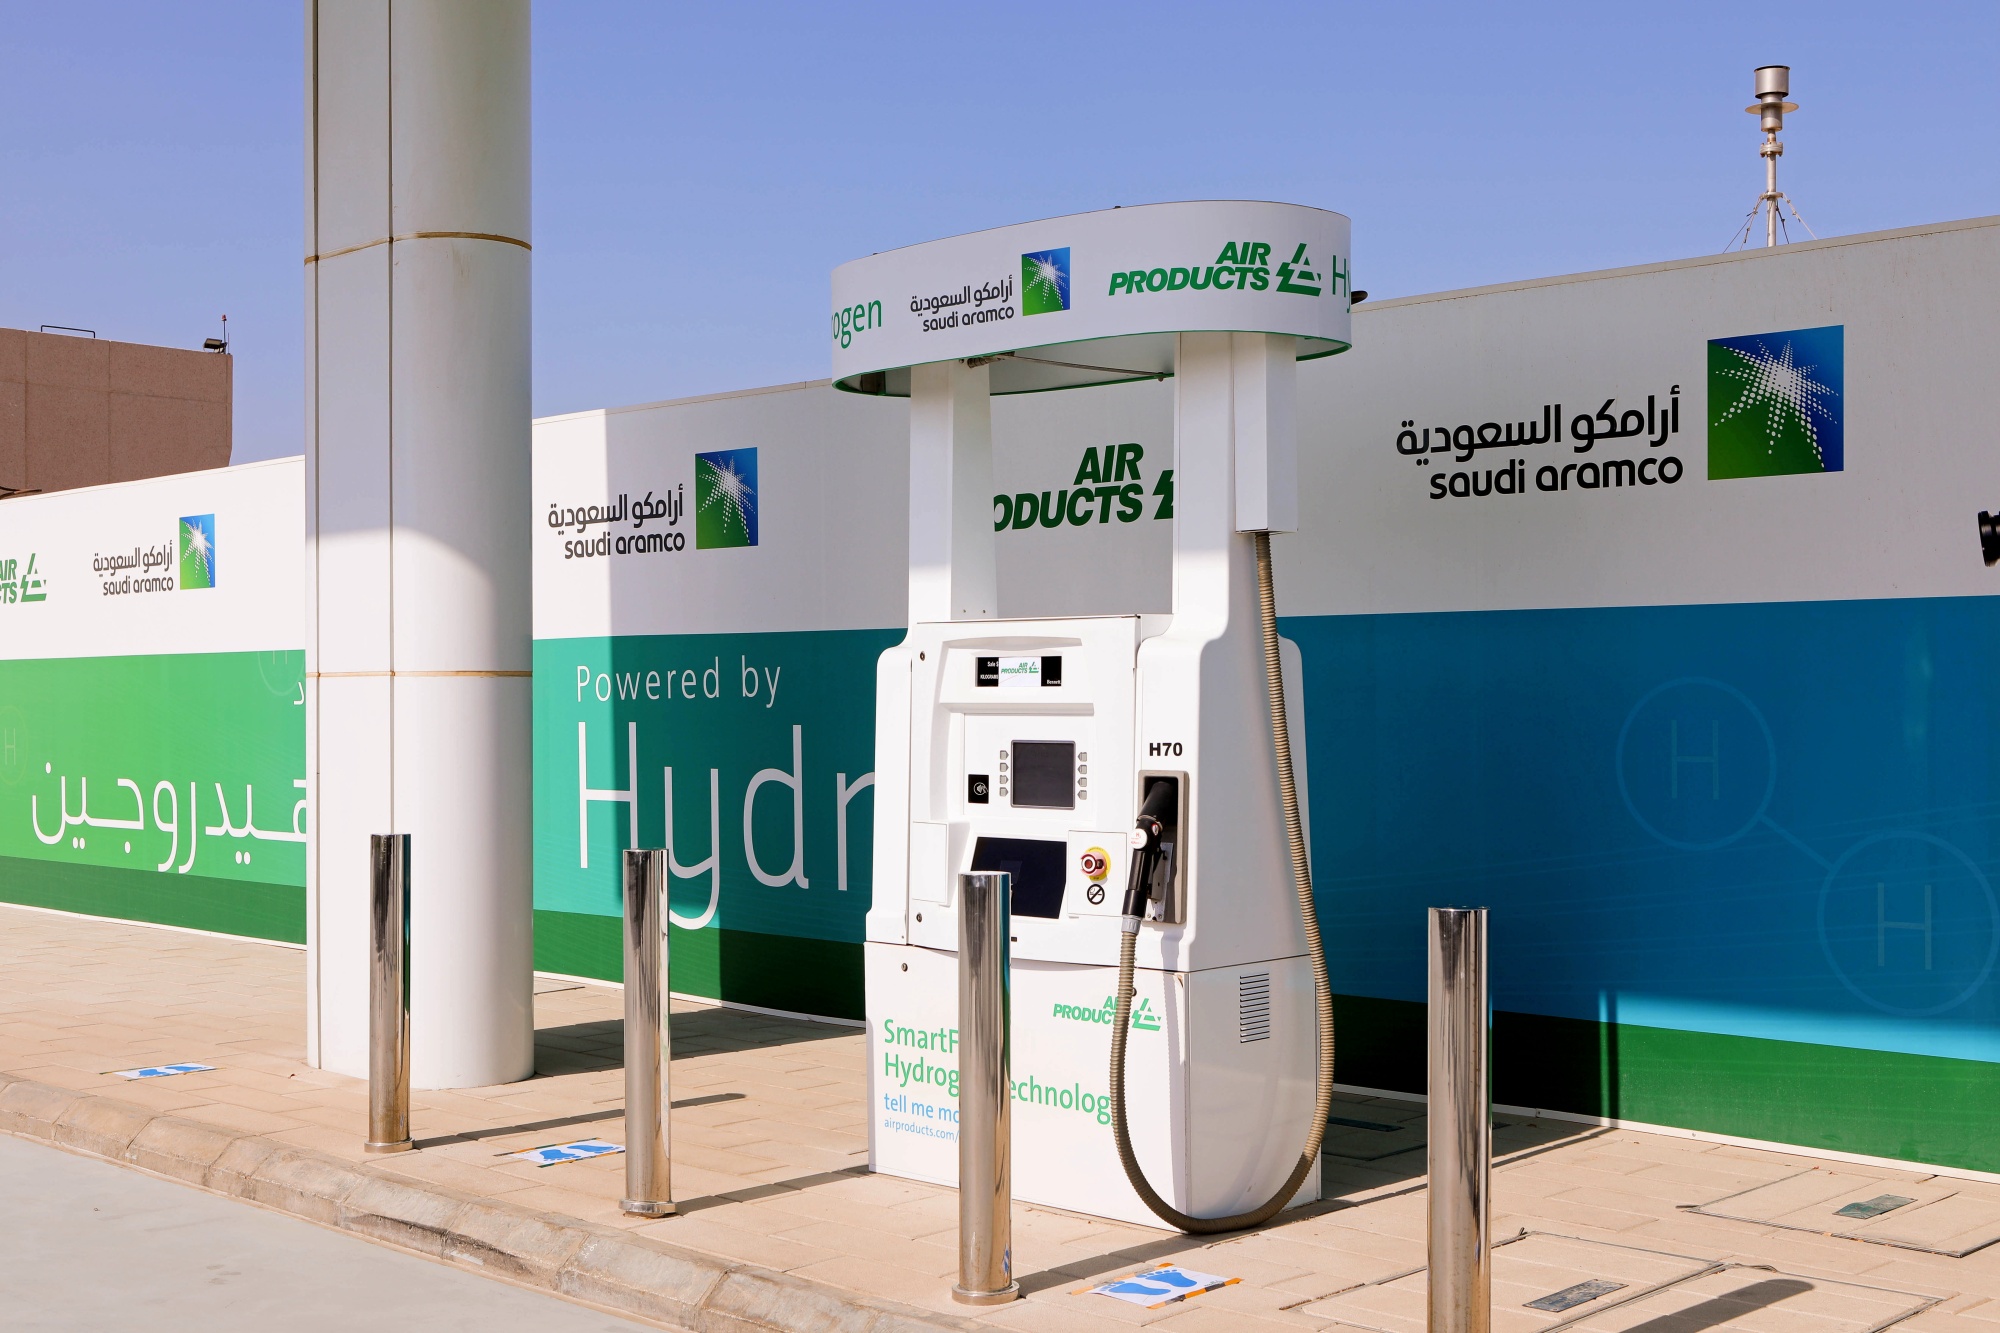 A refueling pump station for hydrogen-powered vehicles at the newly opened hydrogen fueling station, operated by Saudi Aramco, in the Air Products New Technology Center in Dhahran, Saudi Arabia, on Sunday, June 27, 2021.&nbsp;